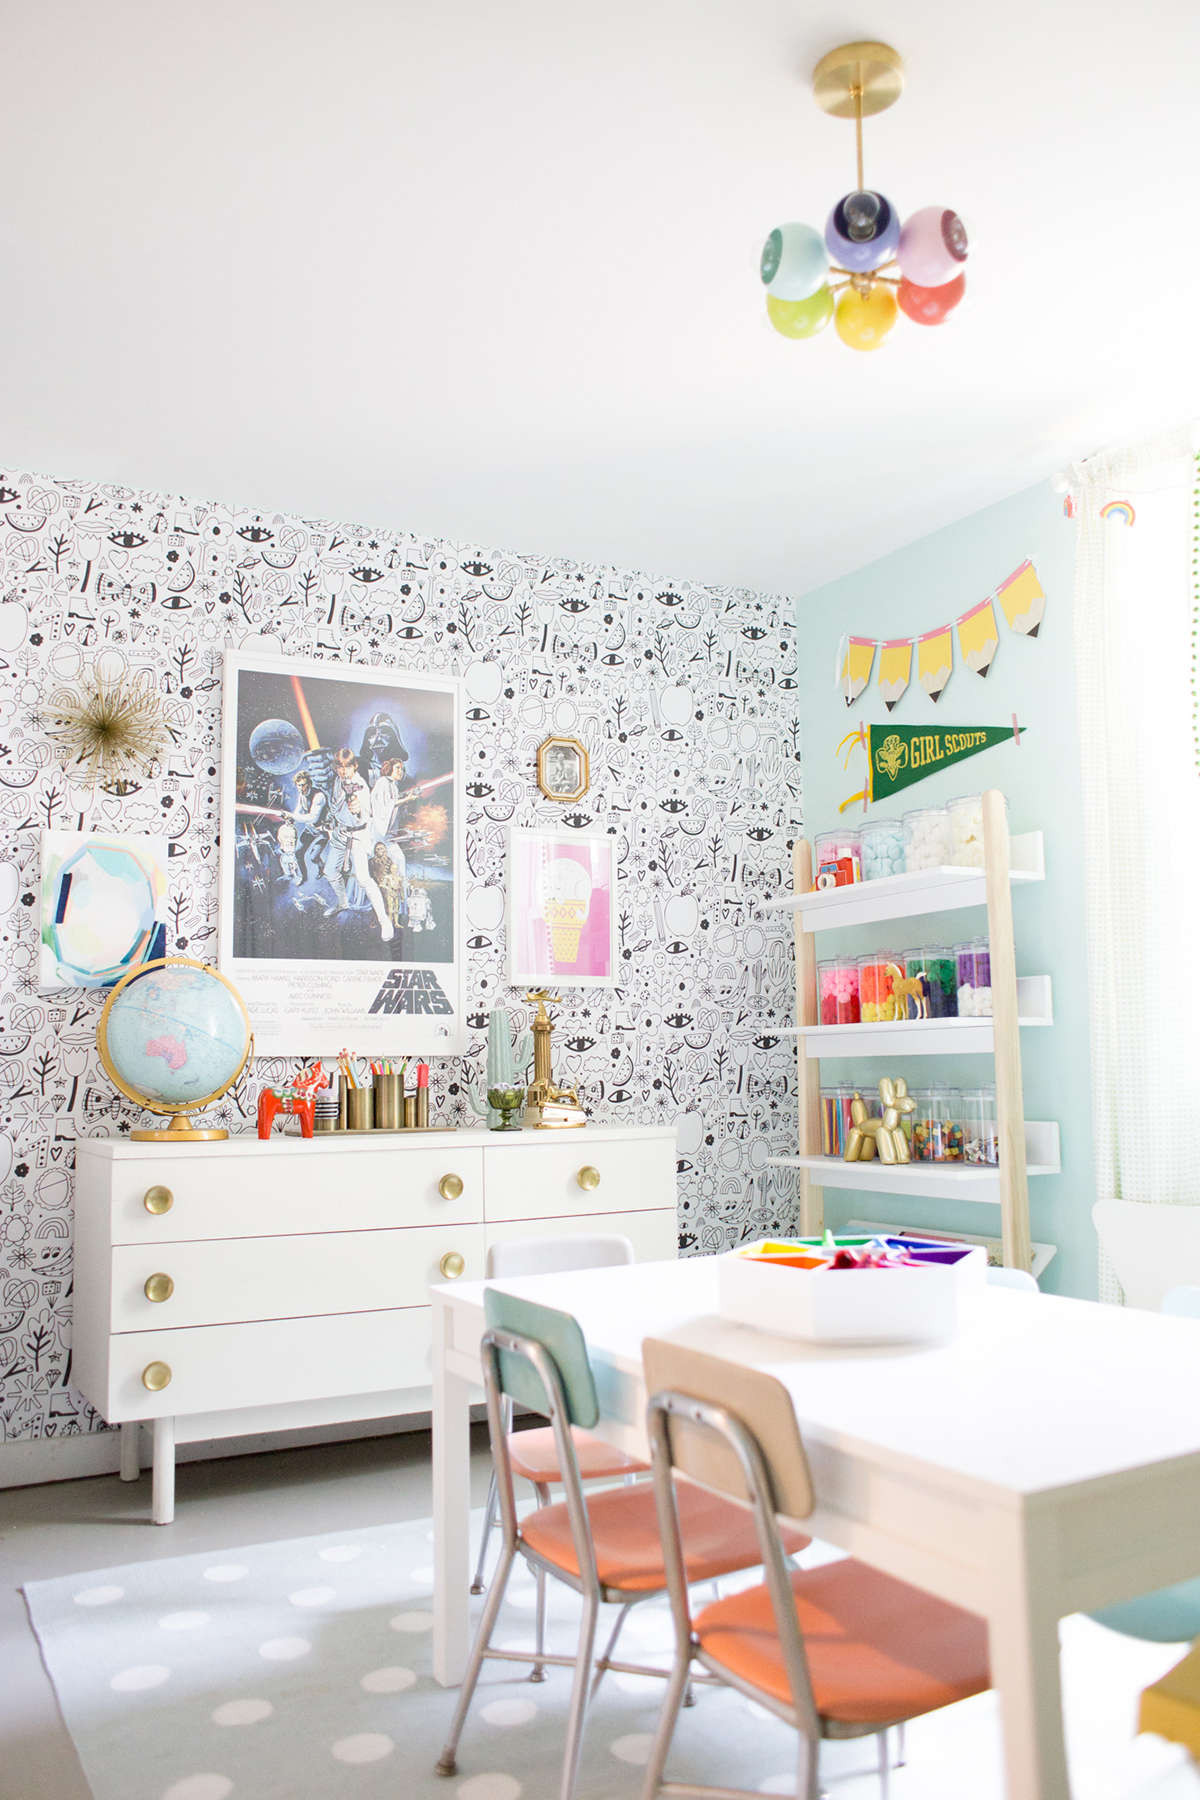 How To Ideas For Kids
 Fascinating Kids Craft Room Ideas To Keep Them Entertained